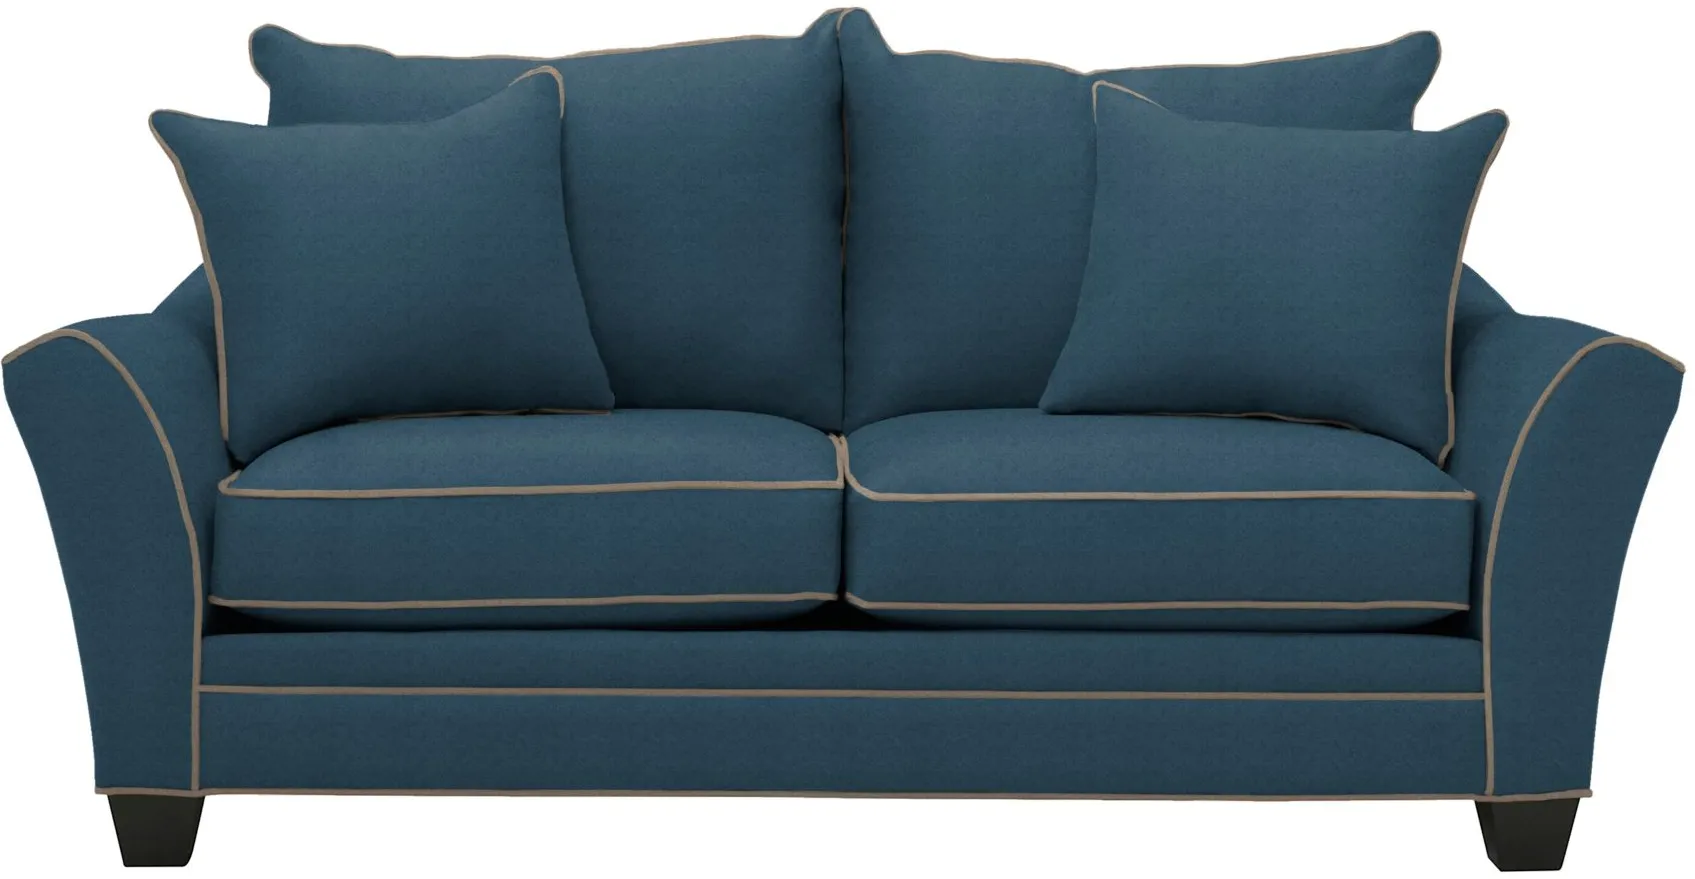 Briarwood Apartment Sleeper Sofa in Suede So Soft Indigo/Mineral by H.M. Richards